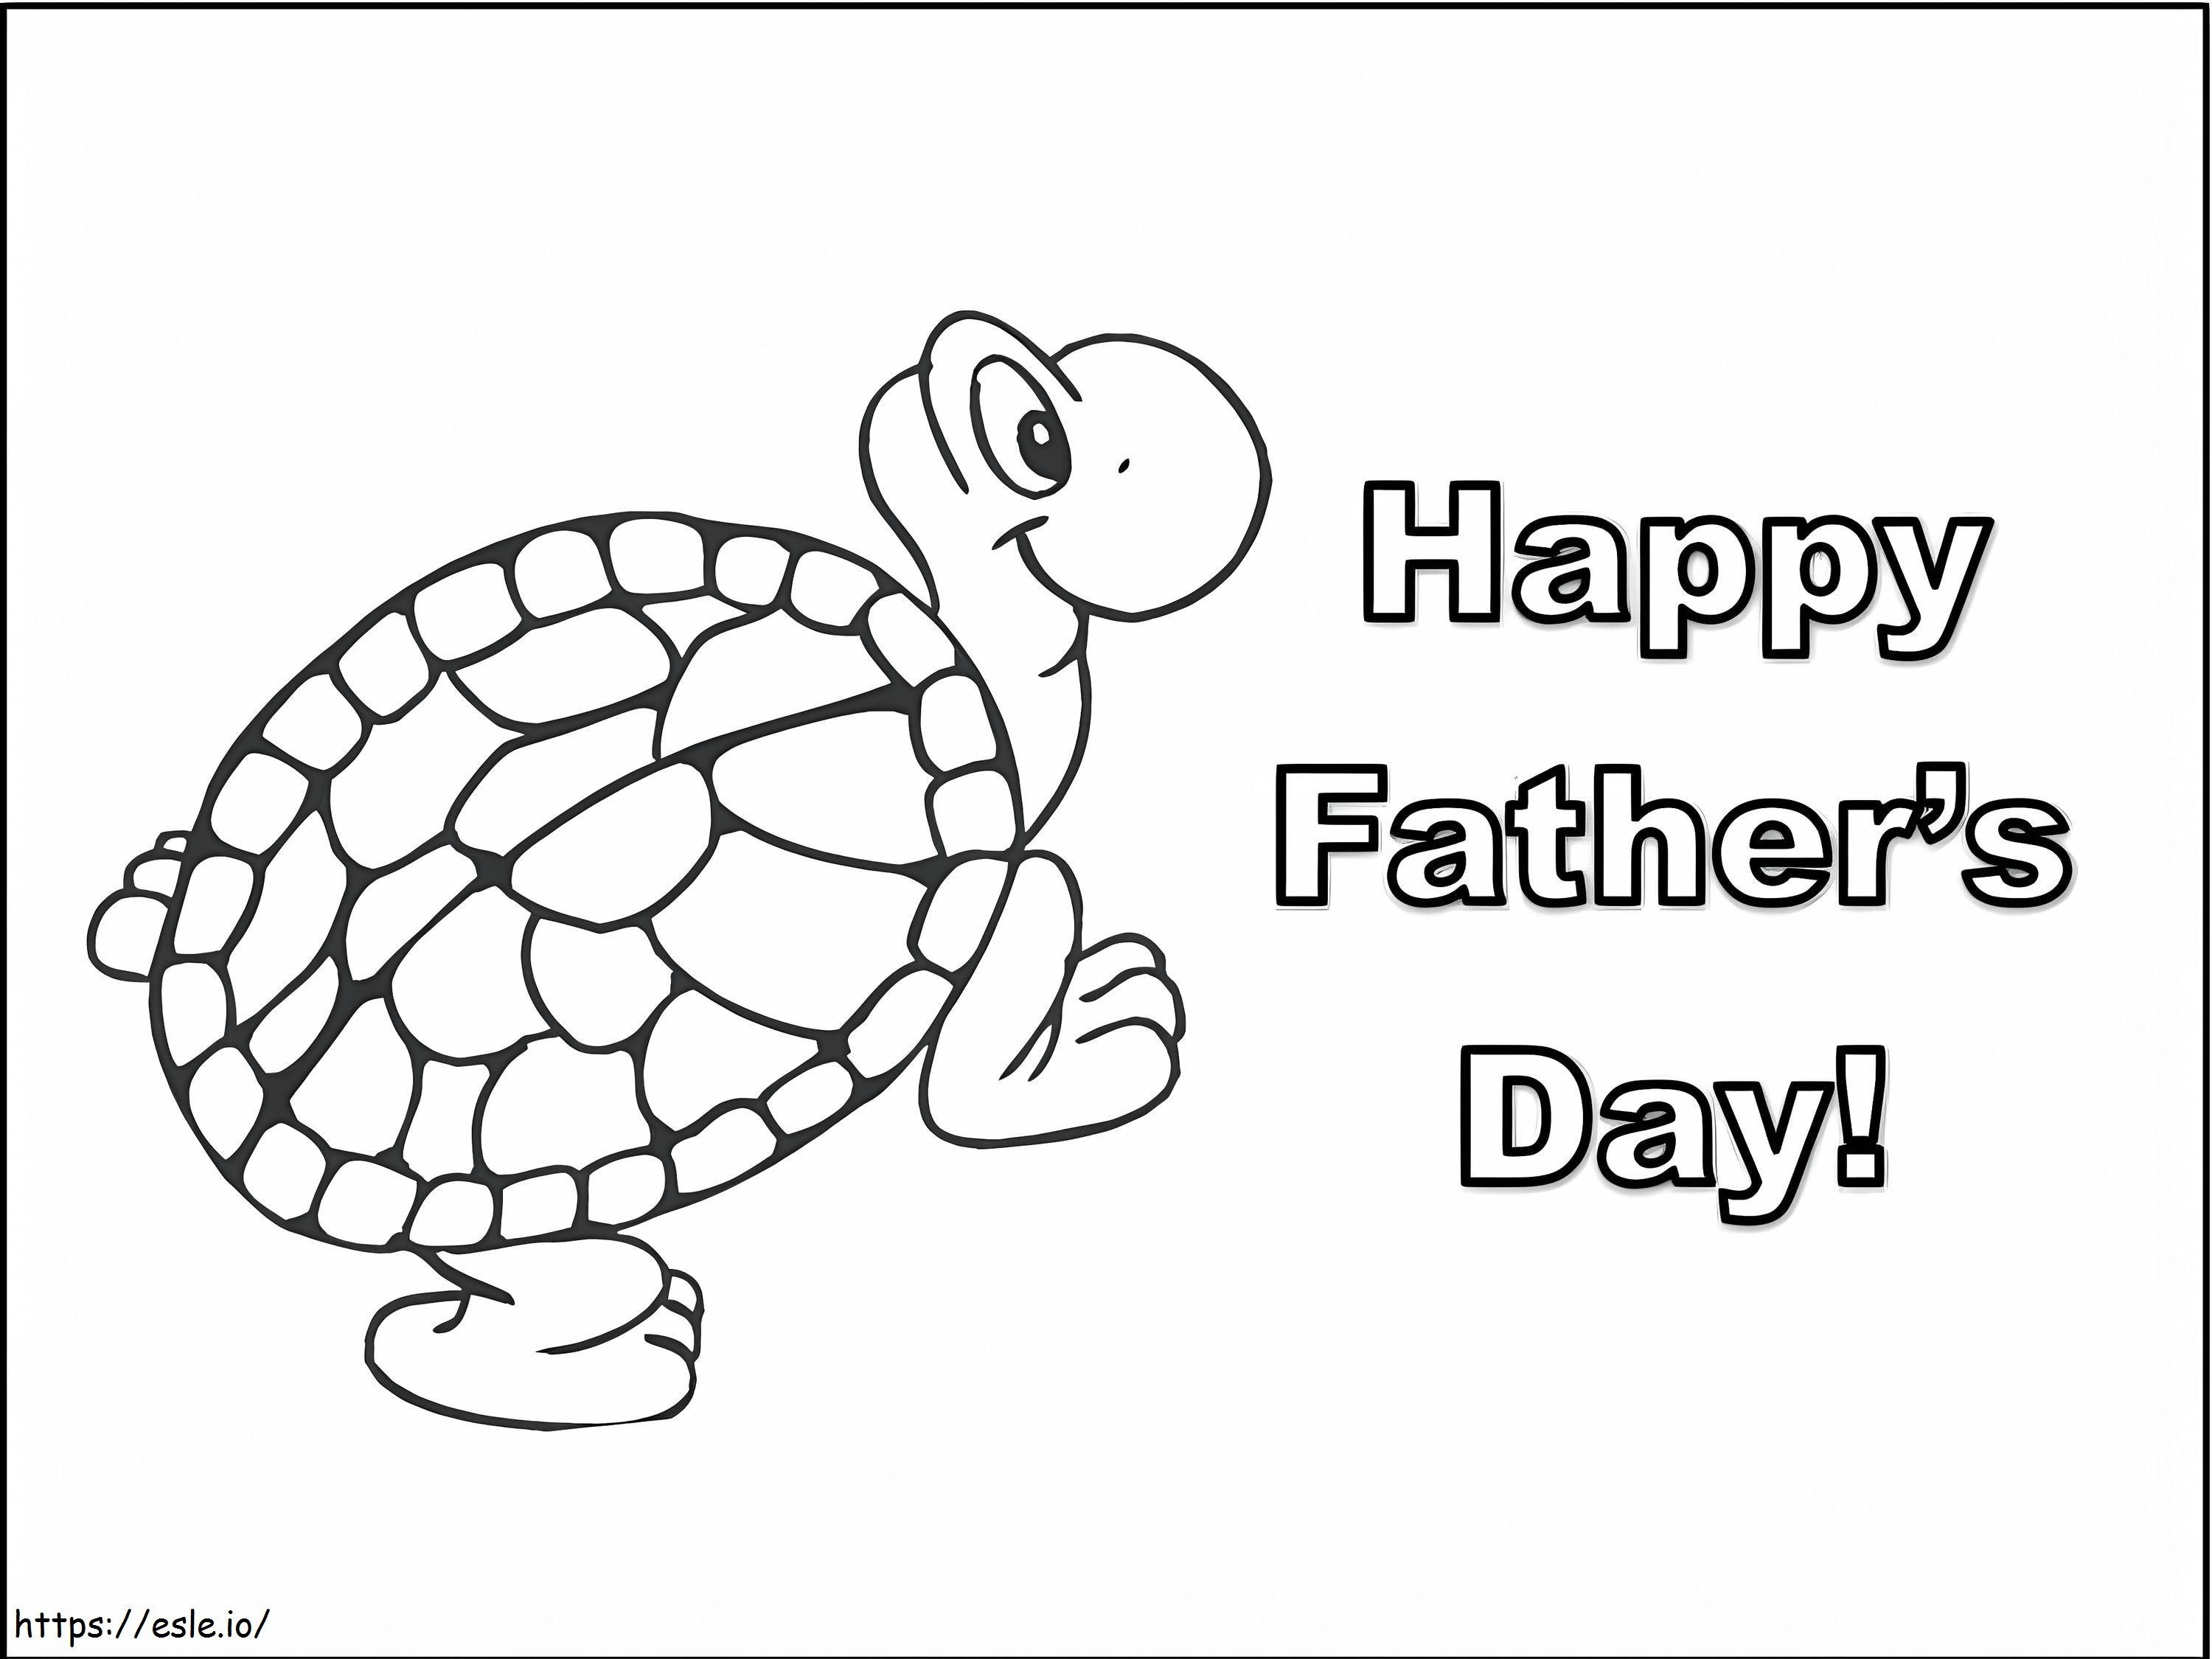 Happy Fathers Day 4 coloring page